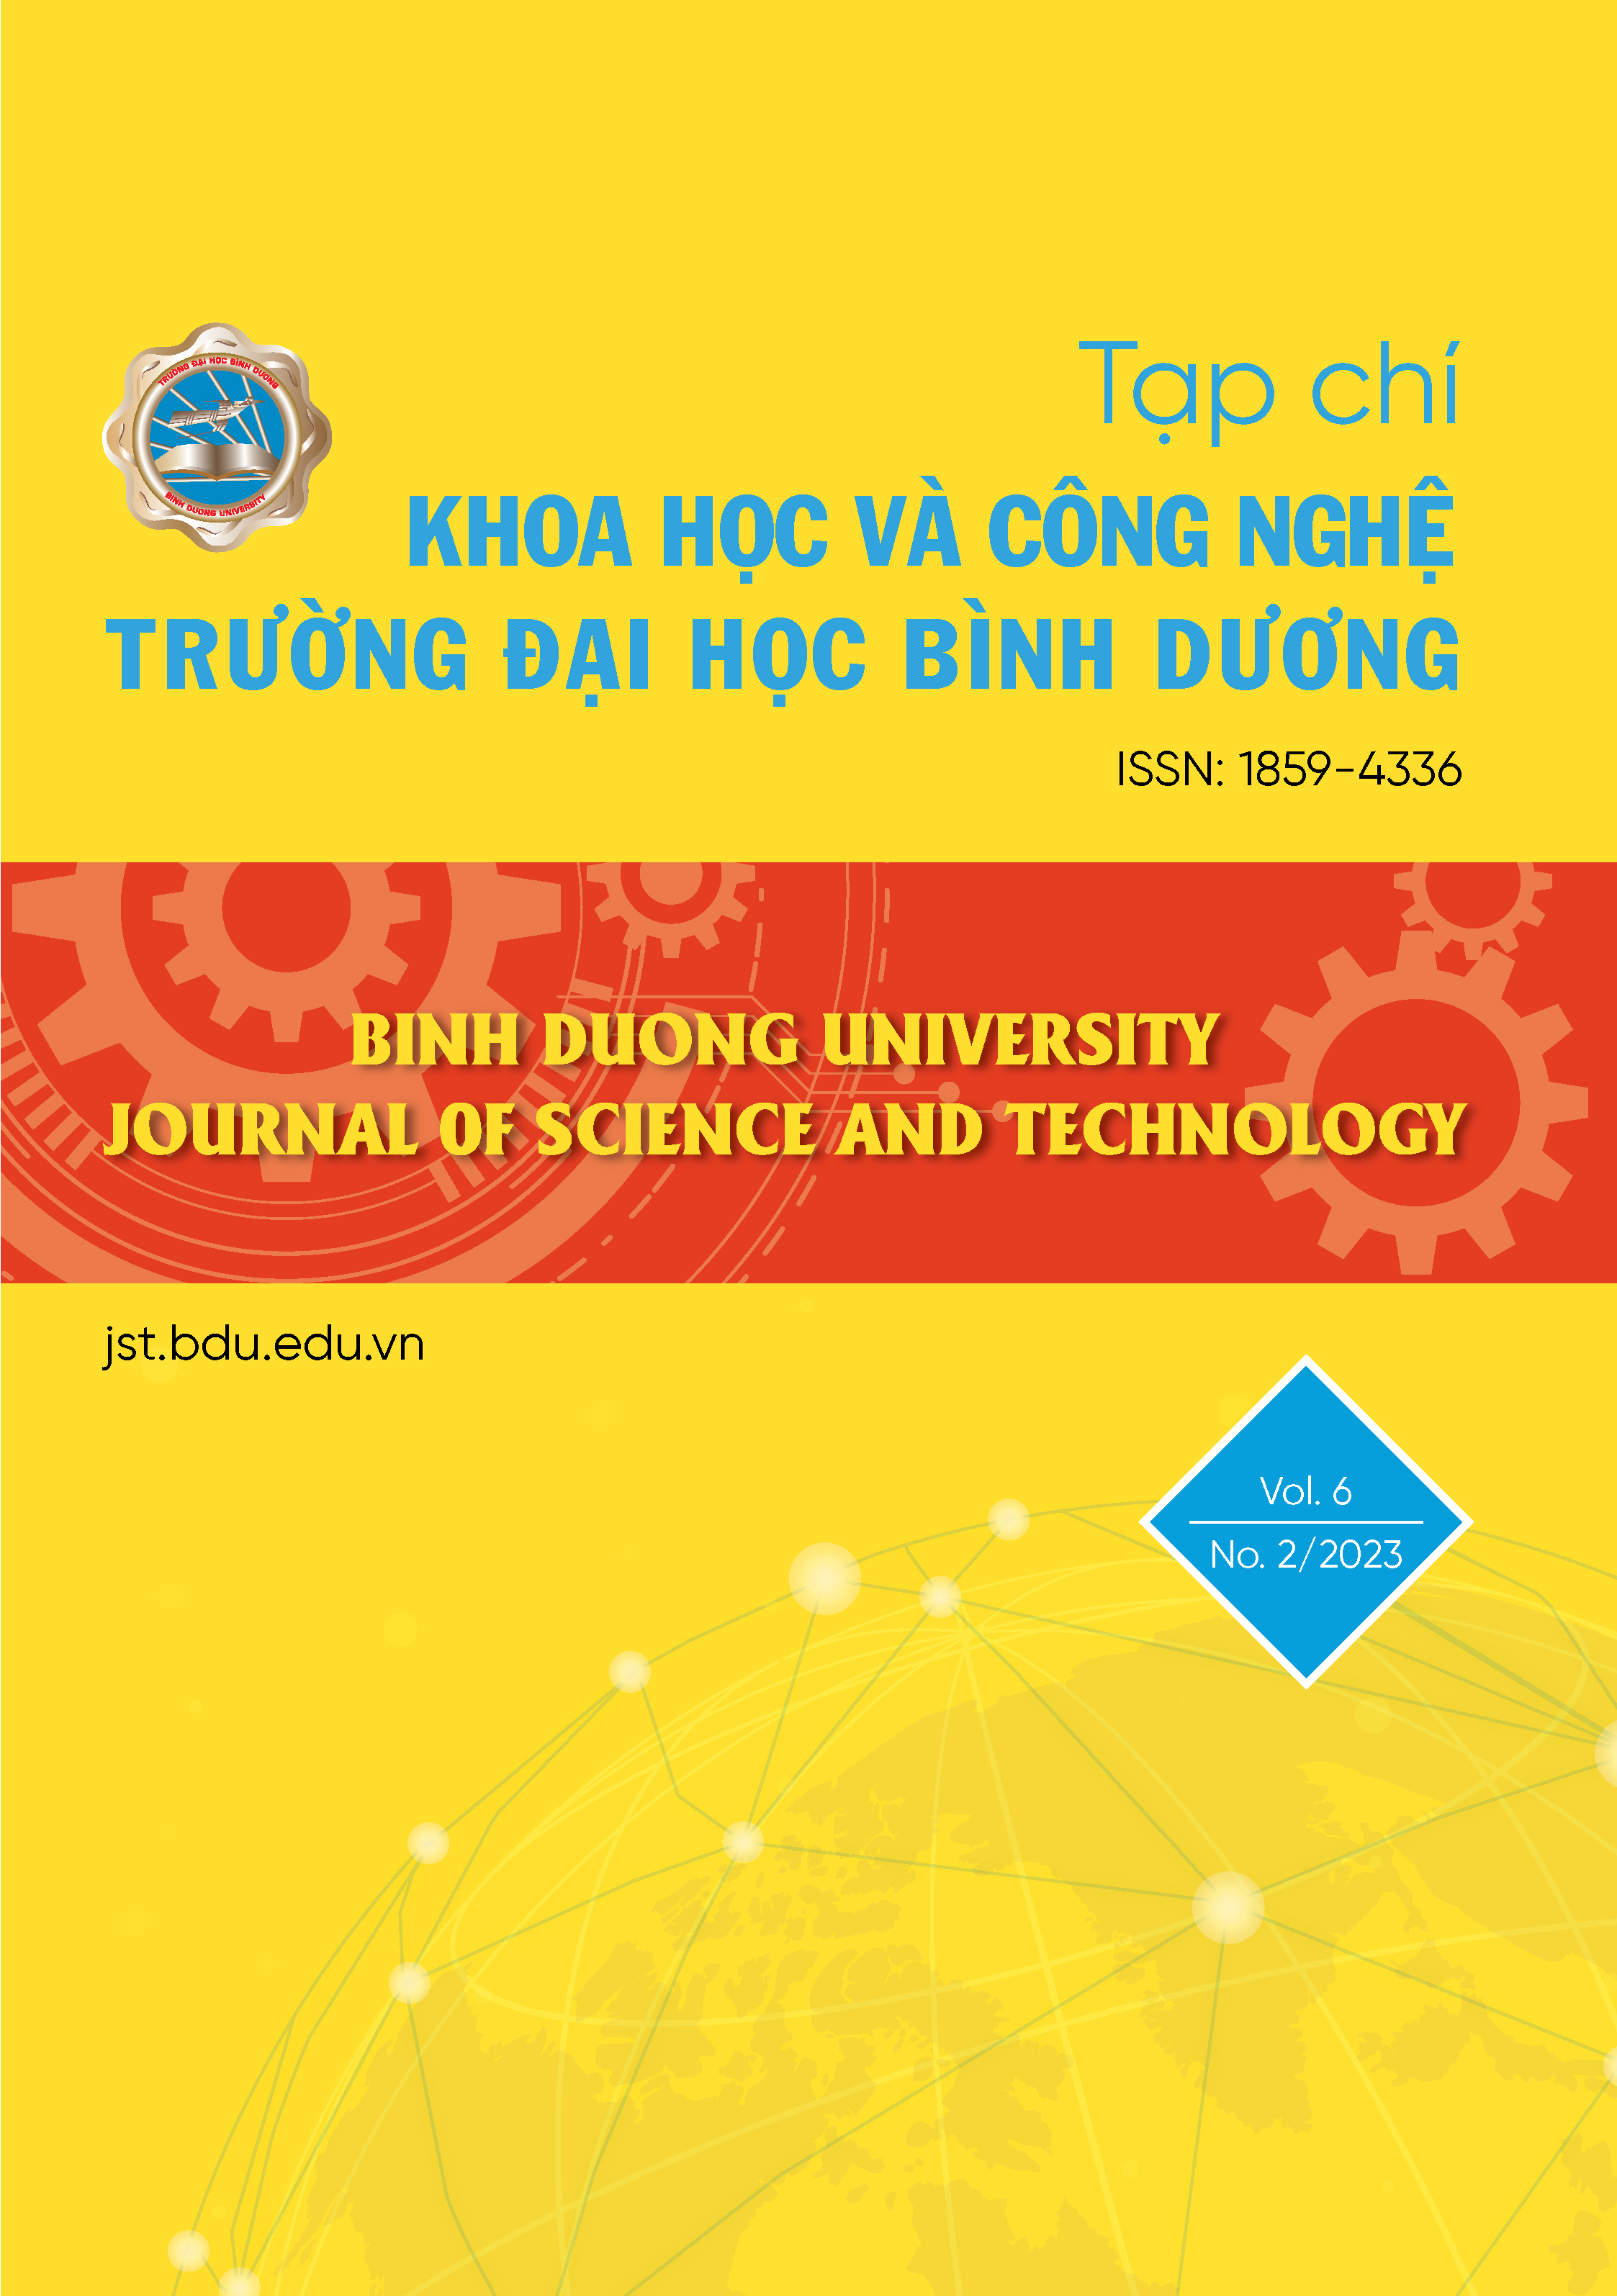 					View Vol. 6 No. 2 (2023): BINH DUONG UNIVERSITY JOURNAL OF SCIENCE AND TECHNOLOGY
				